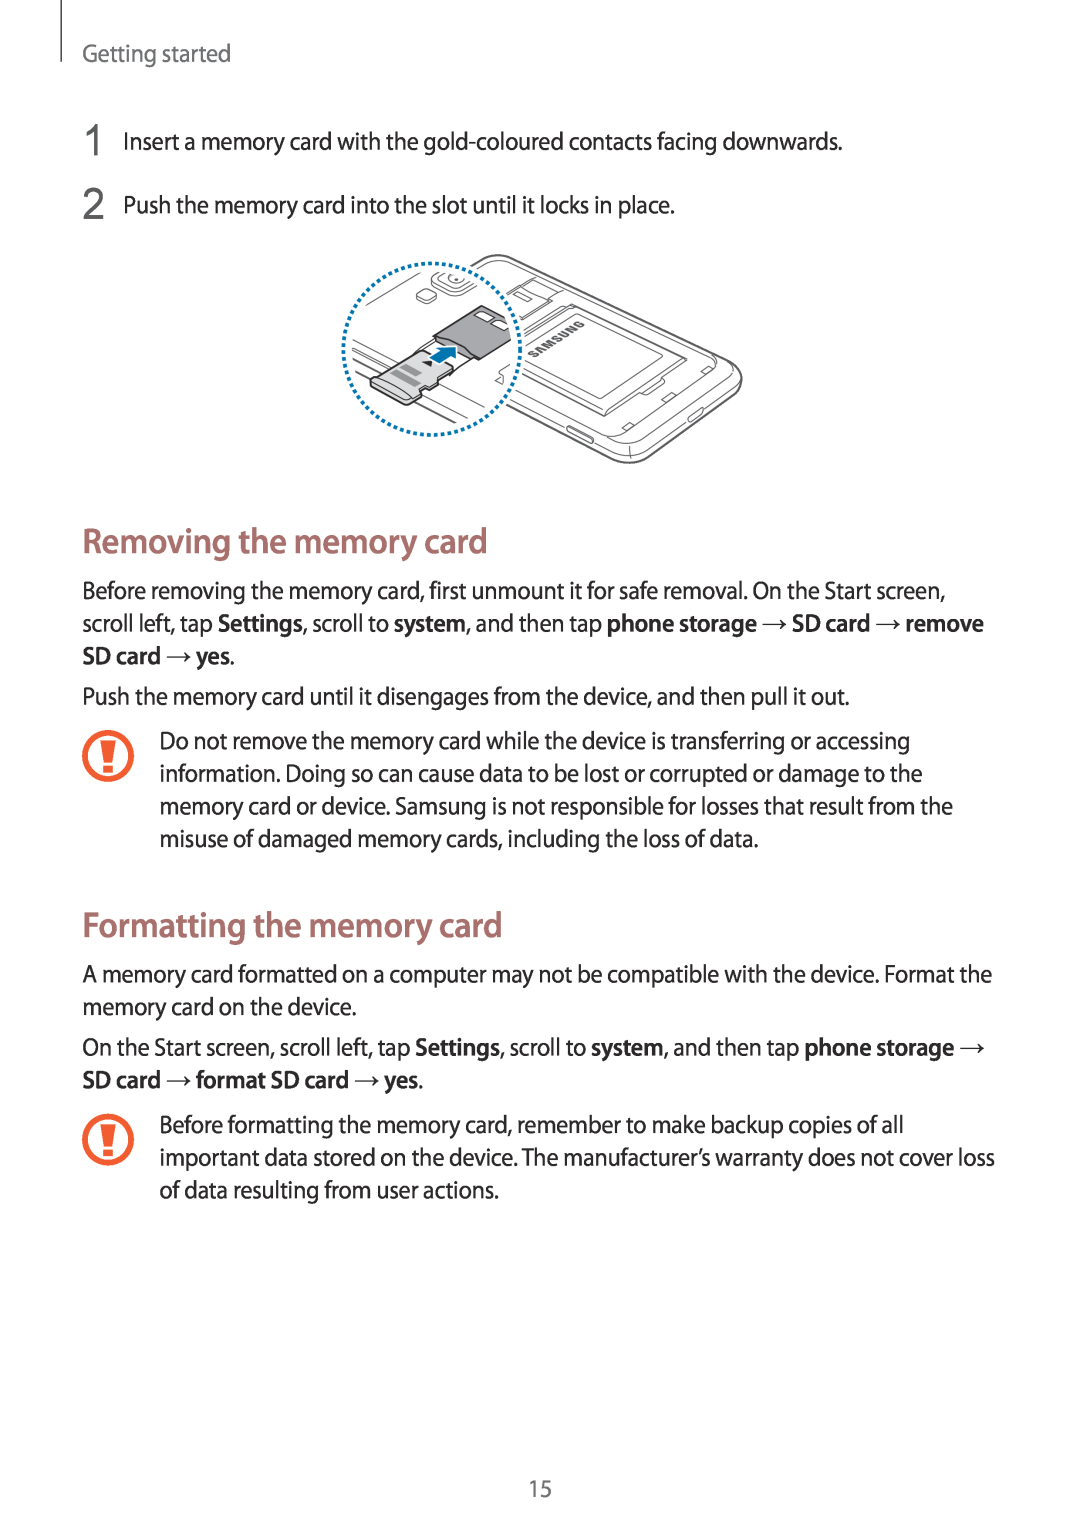 Samsung GT-I8750ALASEB, GT-I8750ALAATO manual Removing the memory card, Formatting the memory card, Getting started 